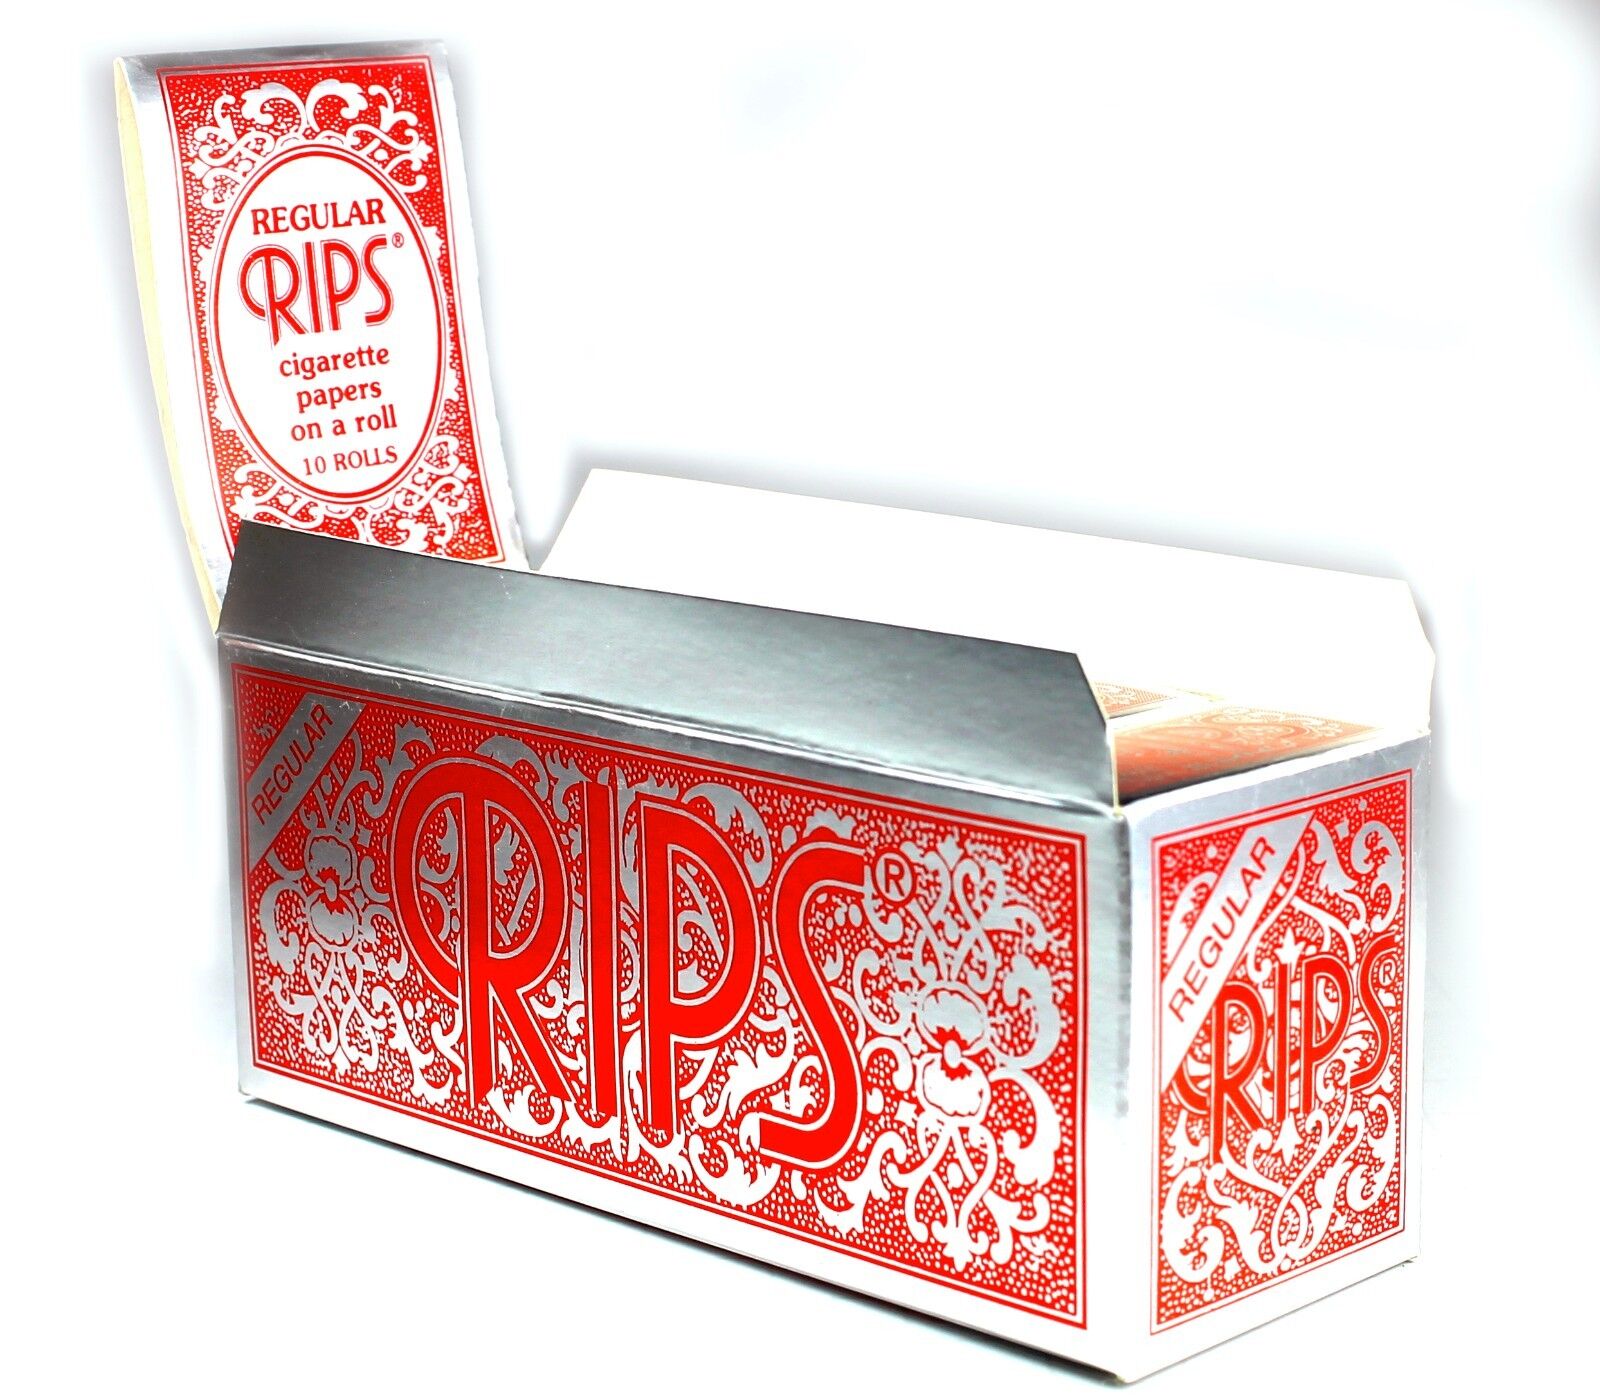 10 Rips Cigarette Rolling Papers on a Roll - Regular Size - Box of 10 Rolls